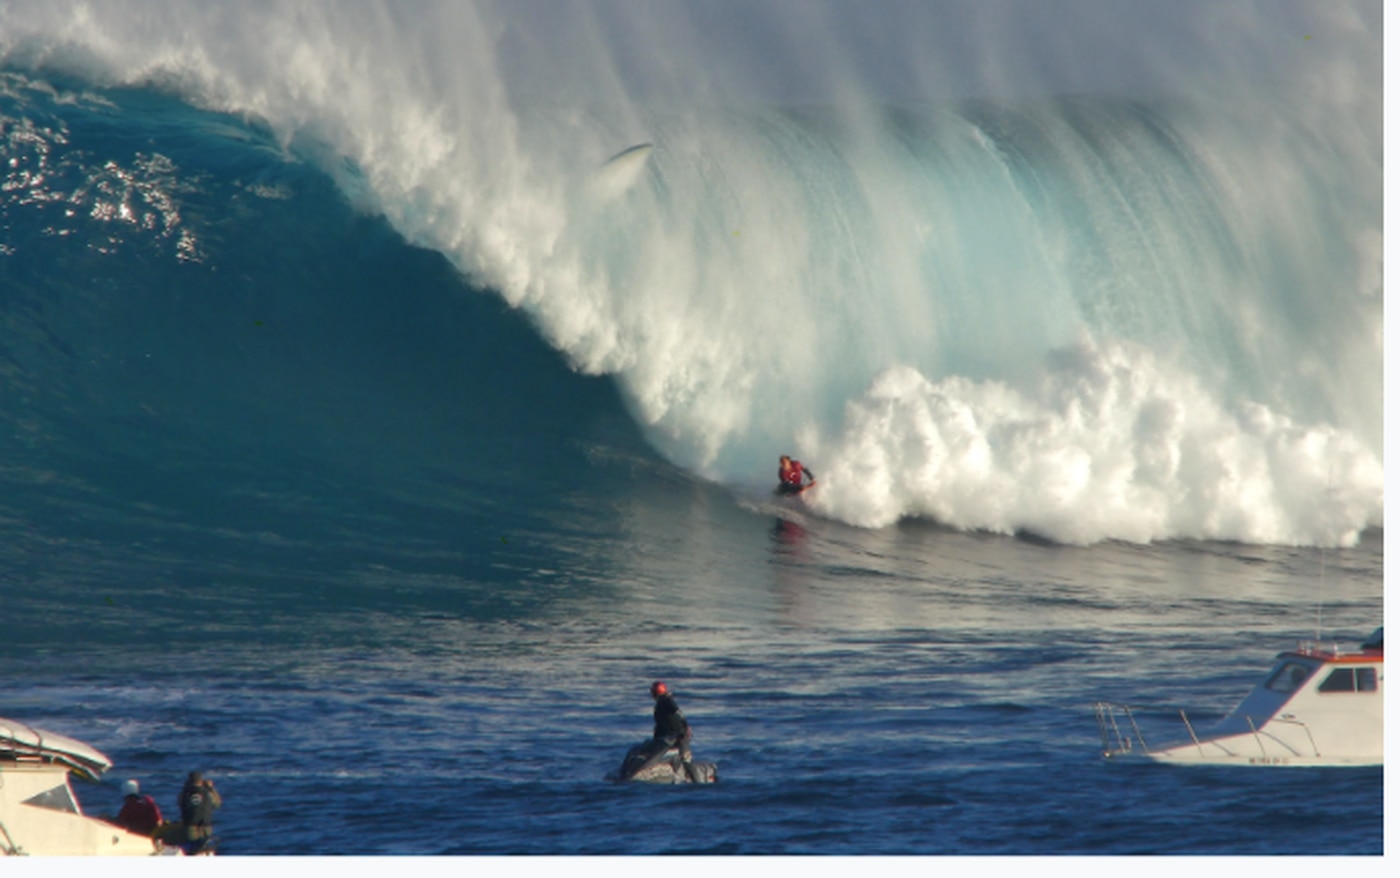 Andrew Karr finishes a ride on a big wave on a body board in Hawaii earlier this year.